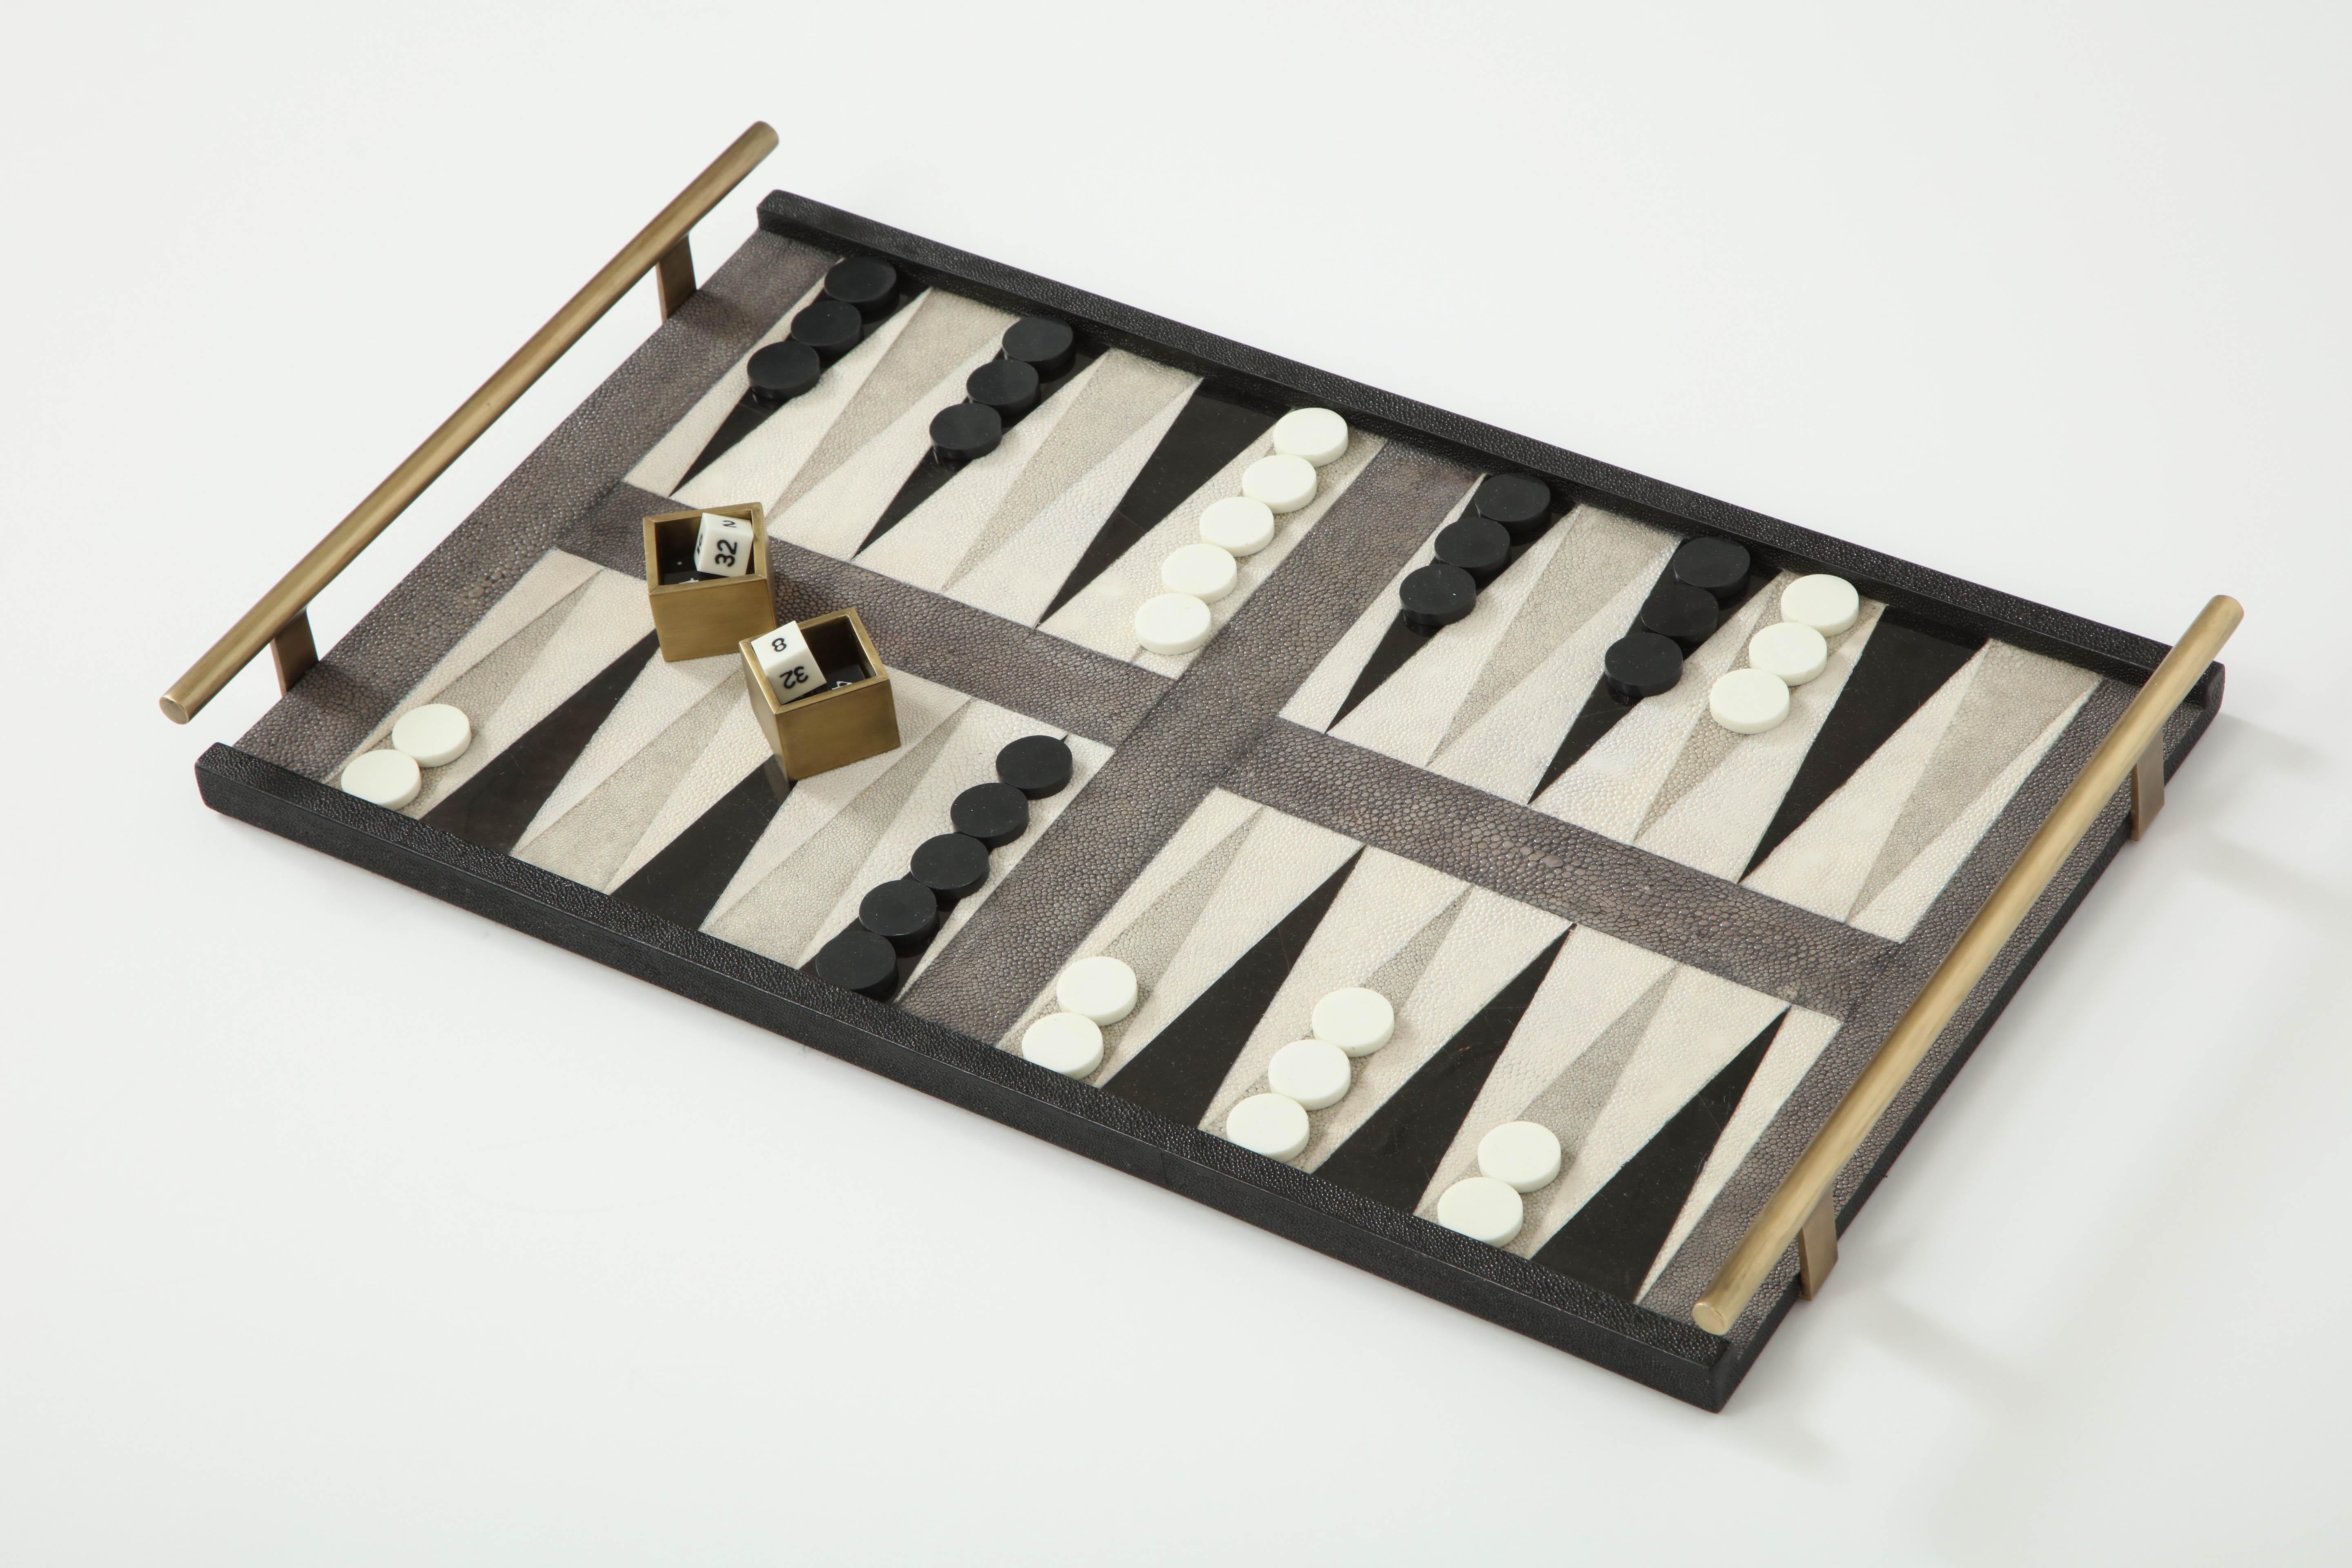 Decorative shagreen and black sea shell backgammon game with bronze details.